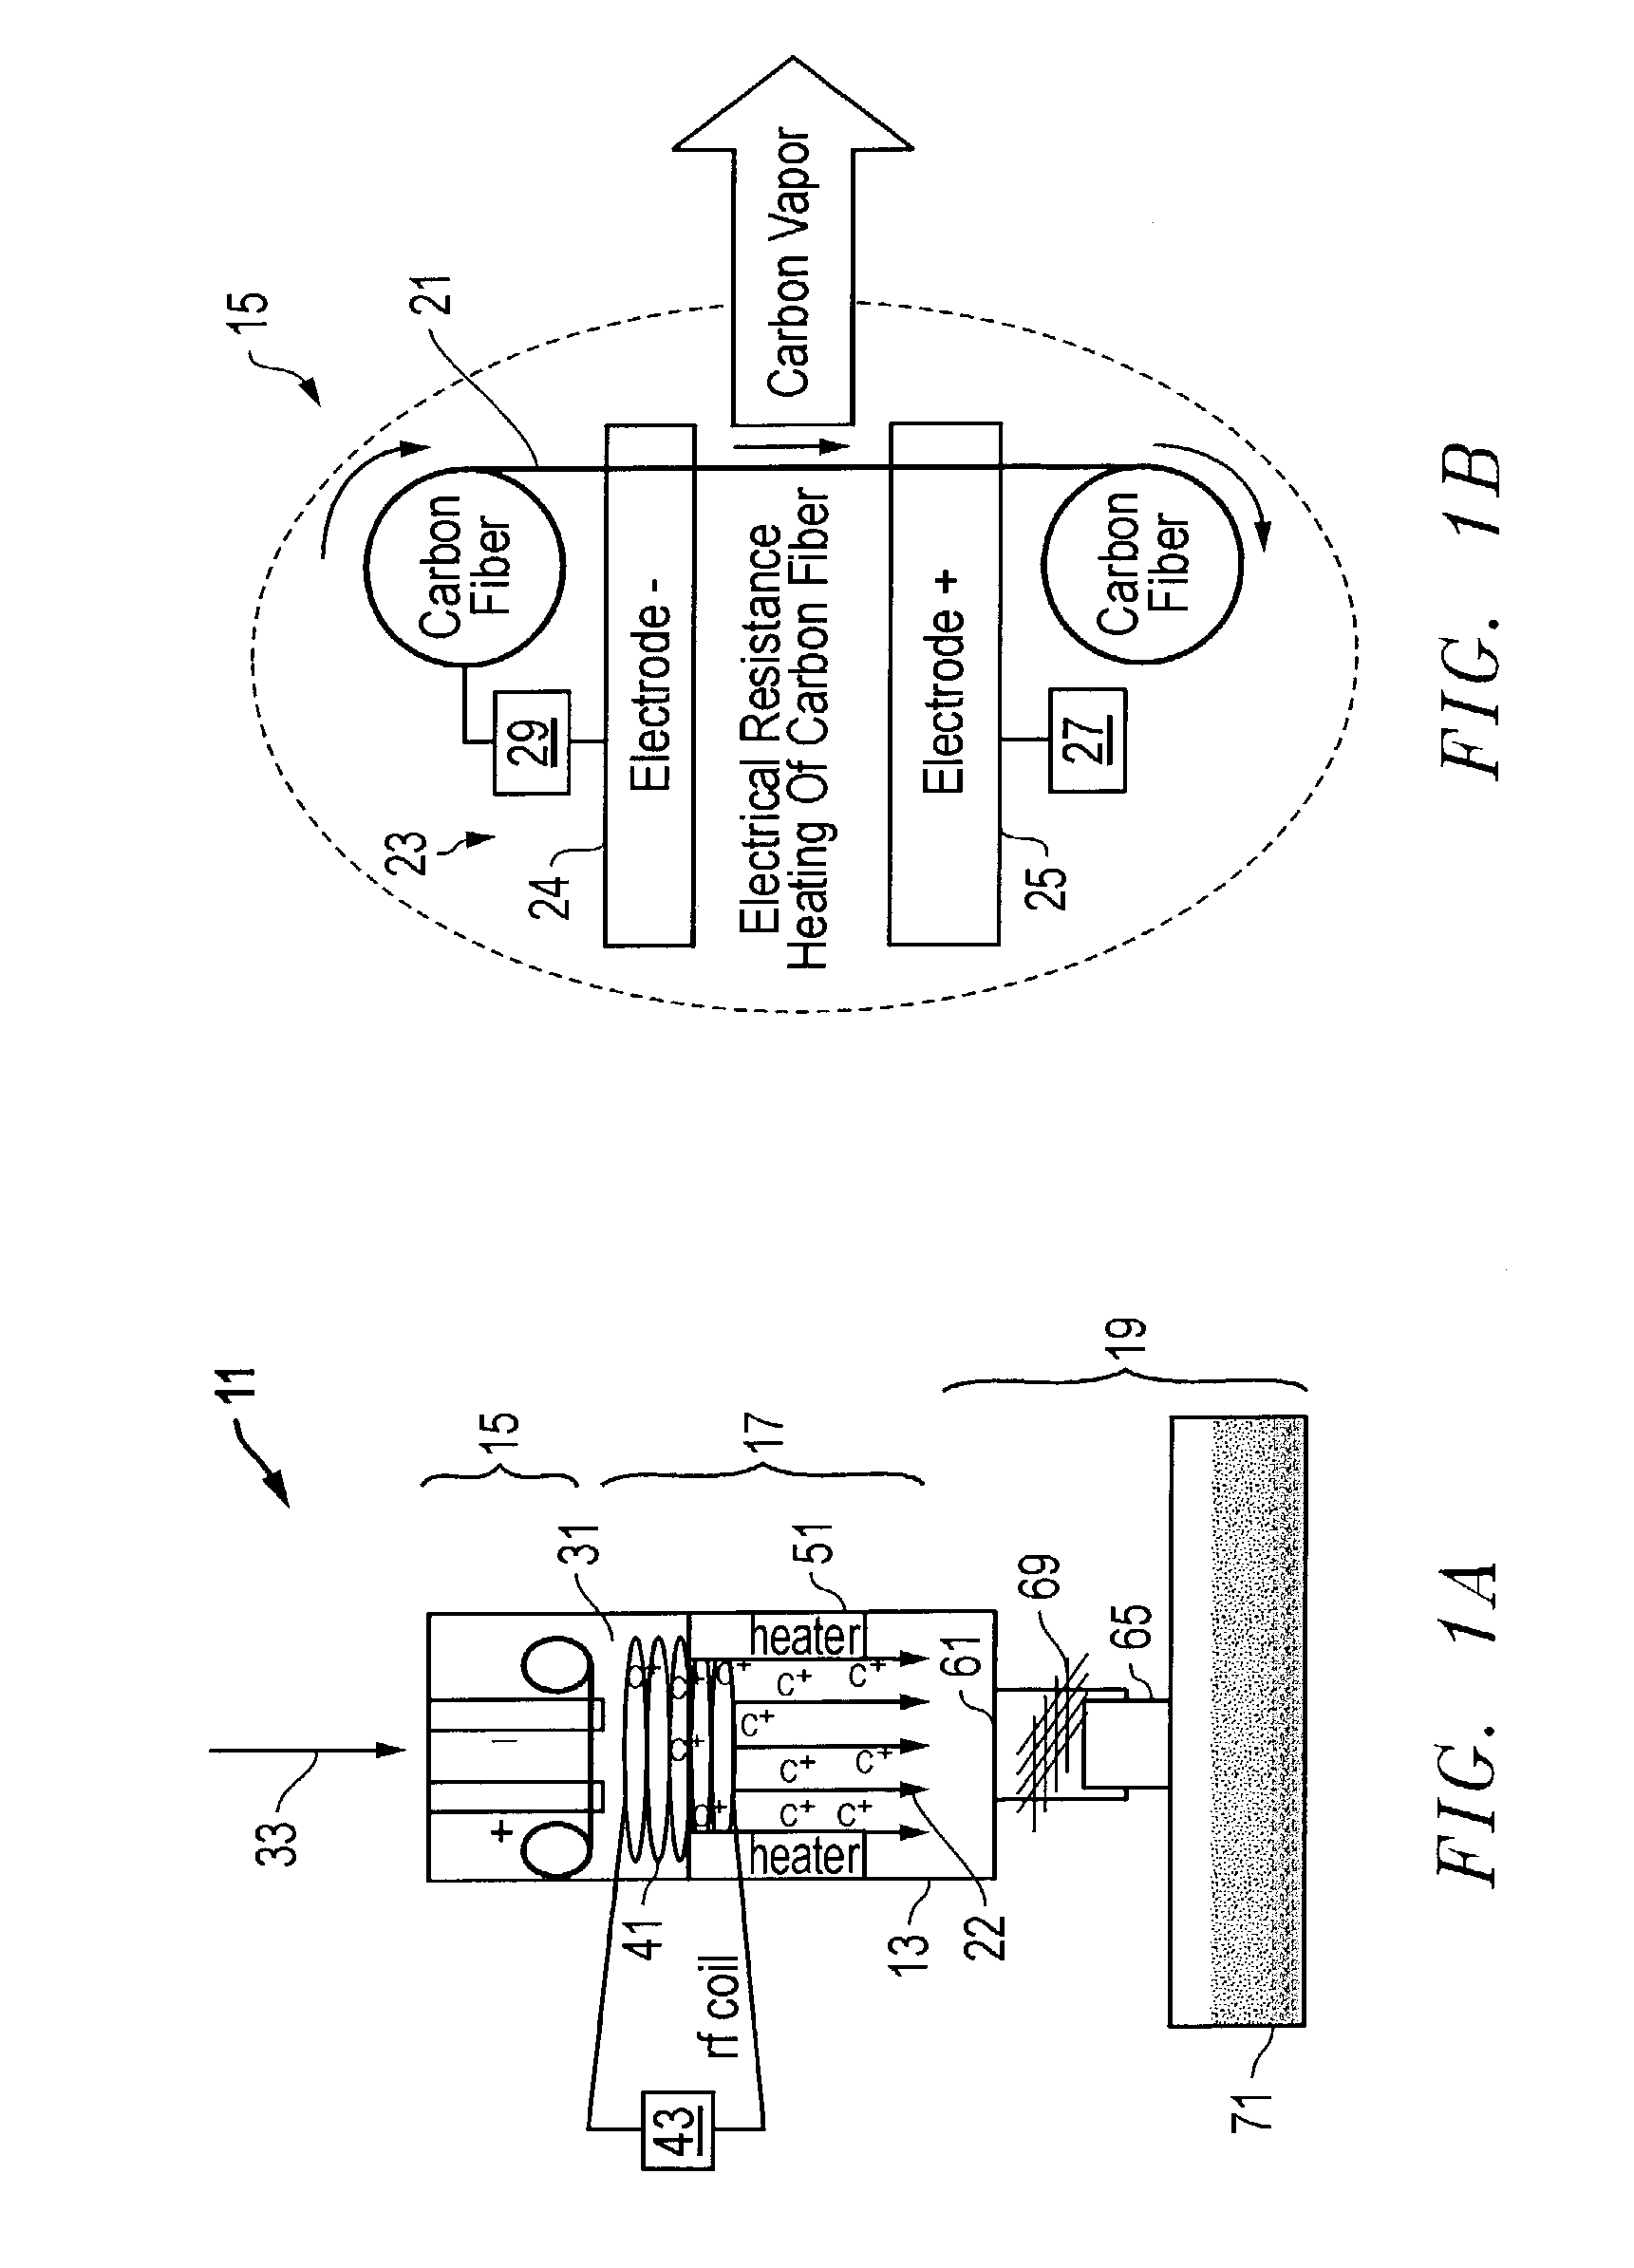 System, method, and apparatus for continuous synthesis of single-walled carbon nanotubes